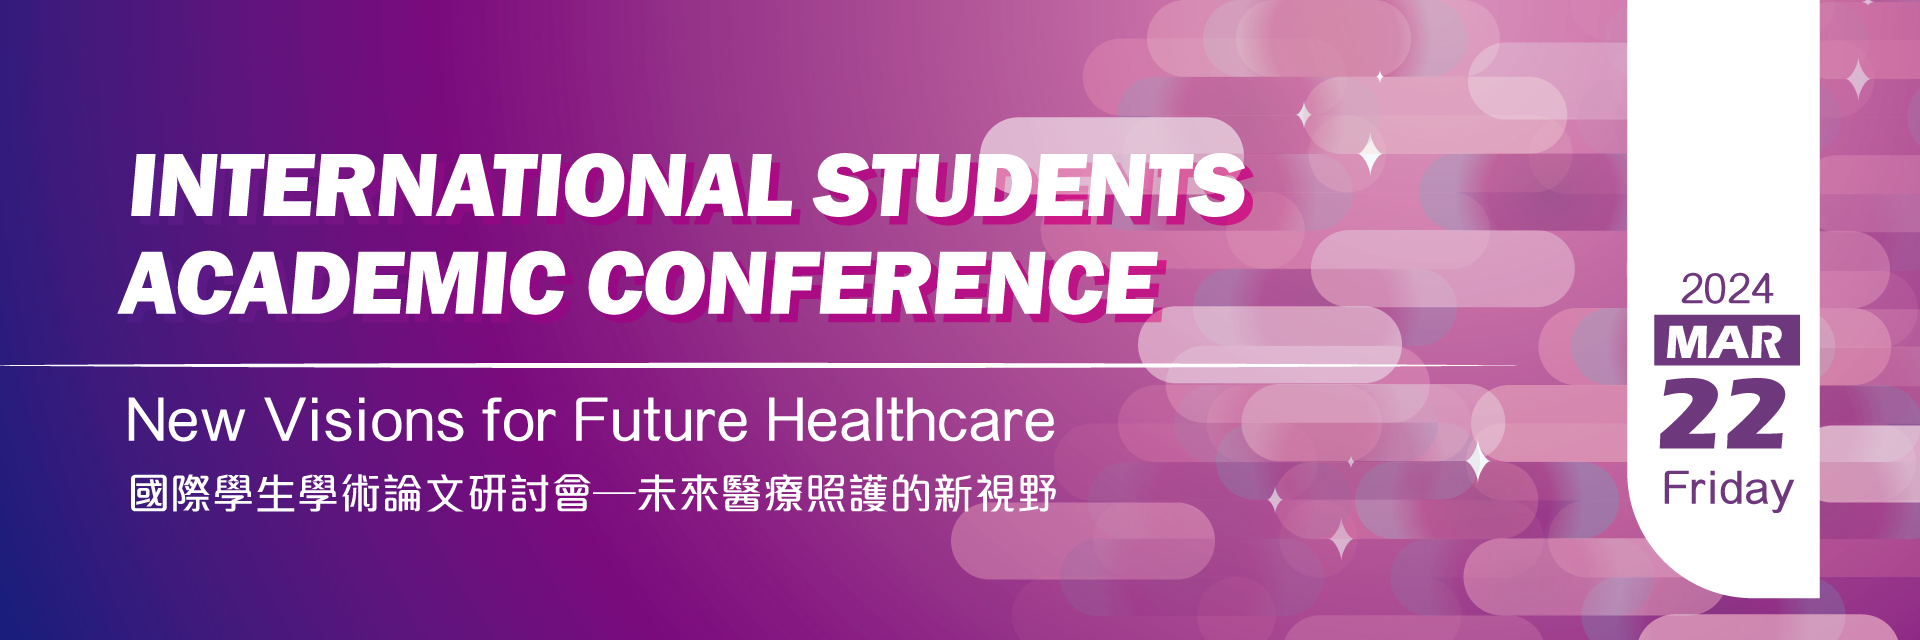 2024 International Students Academic Conference